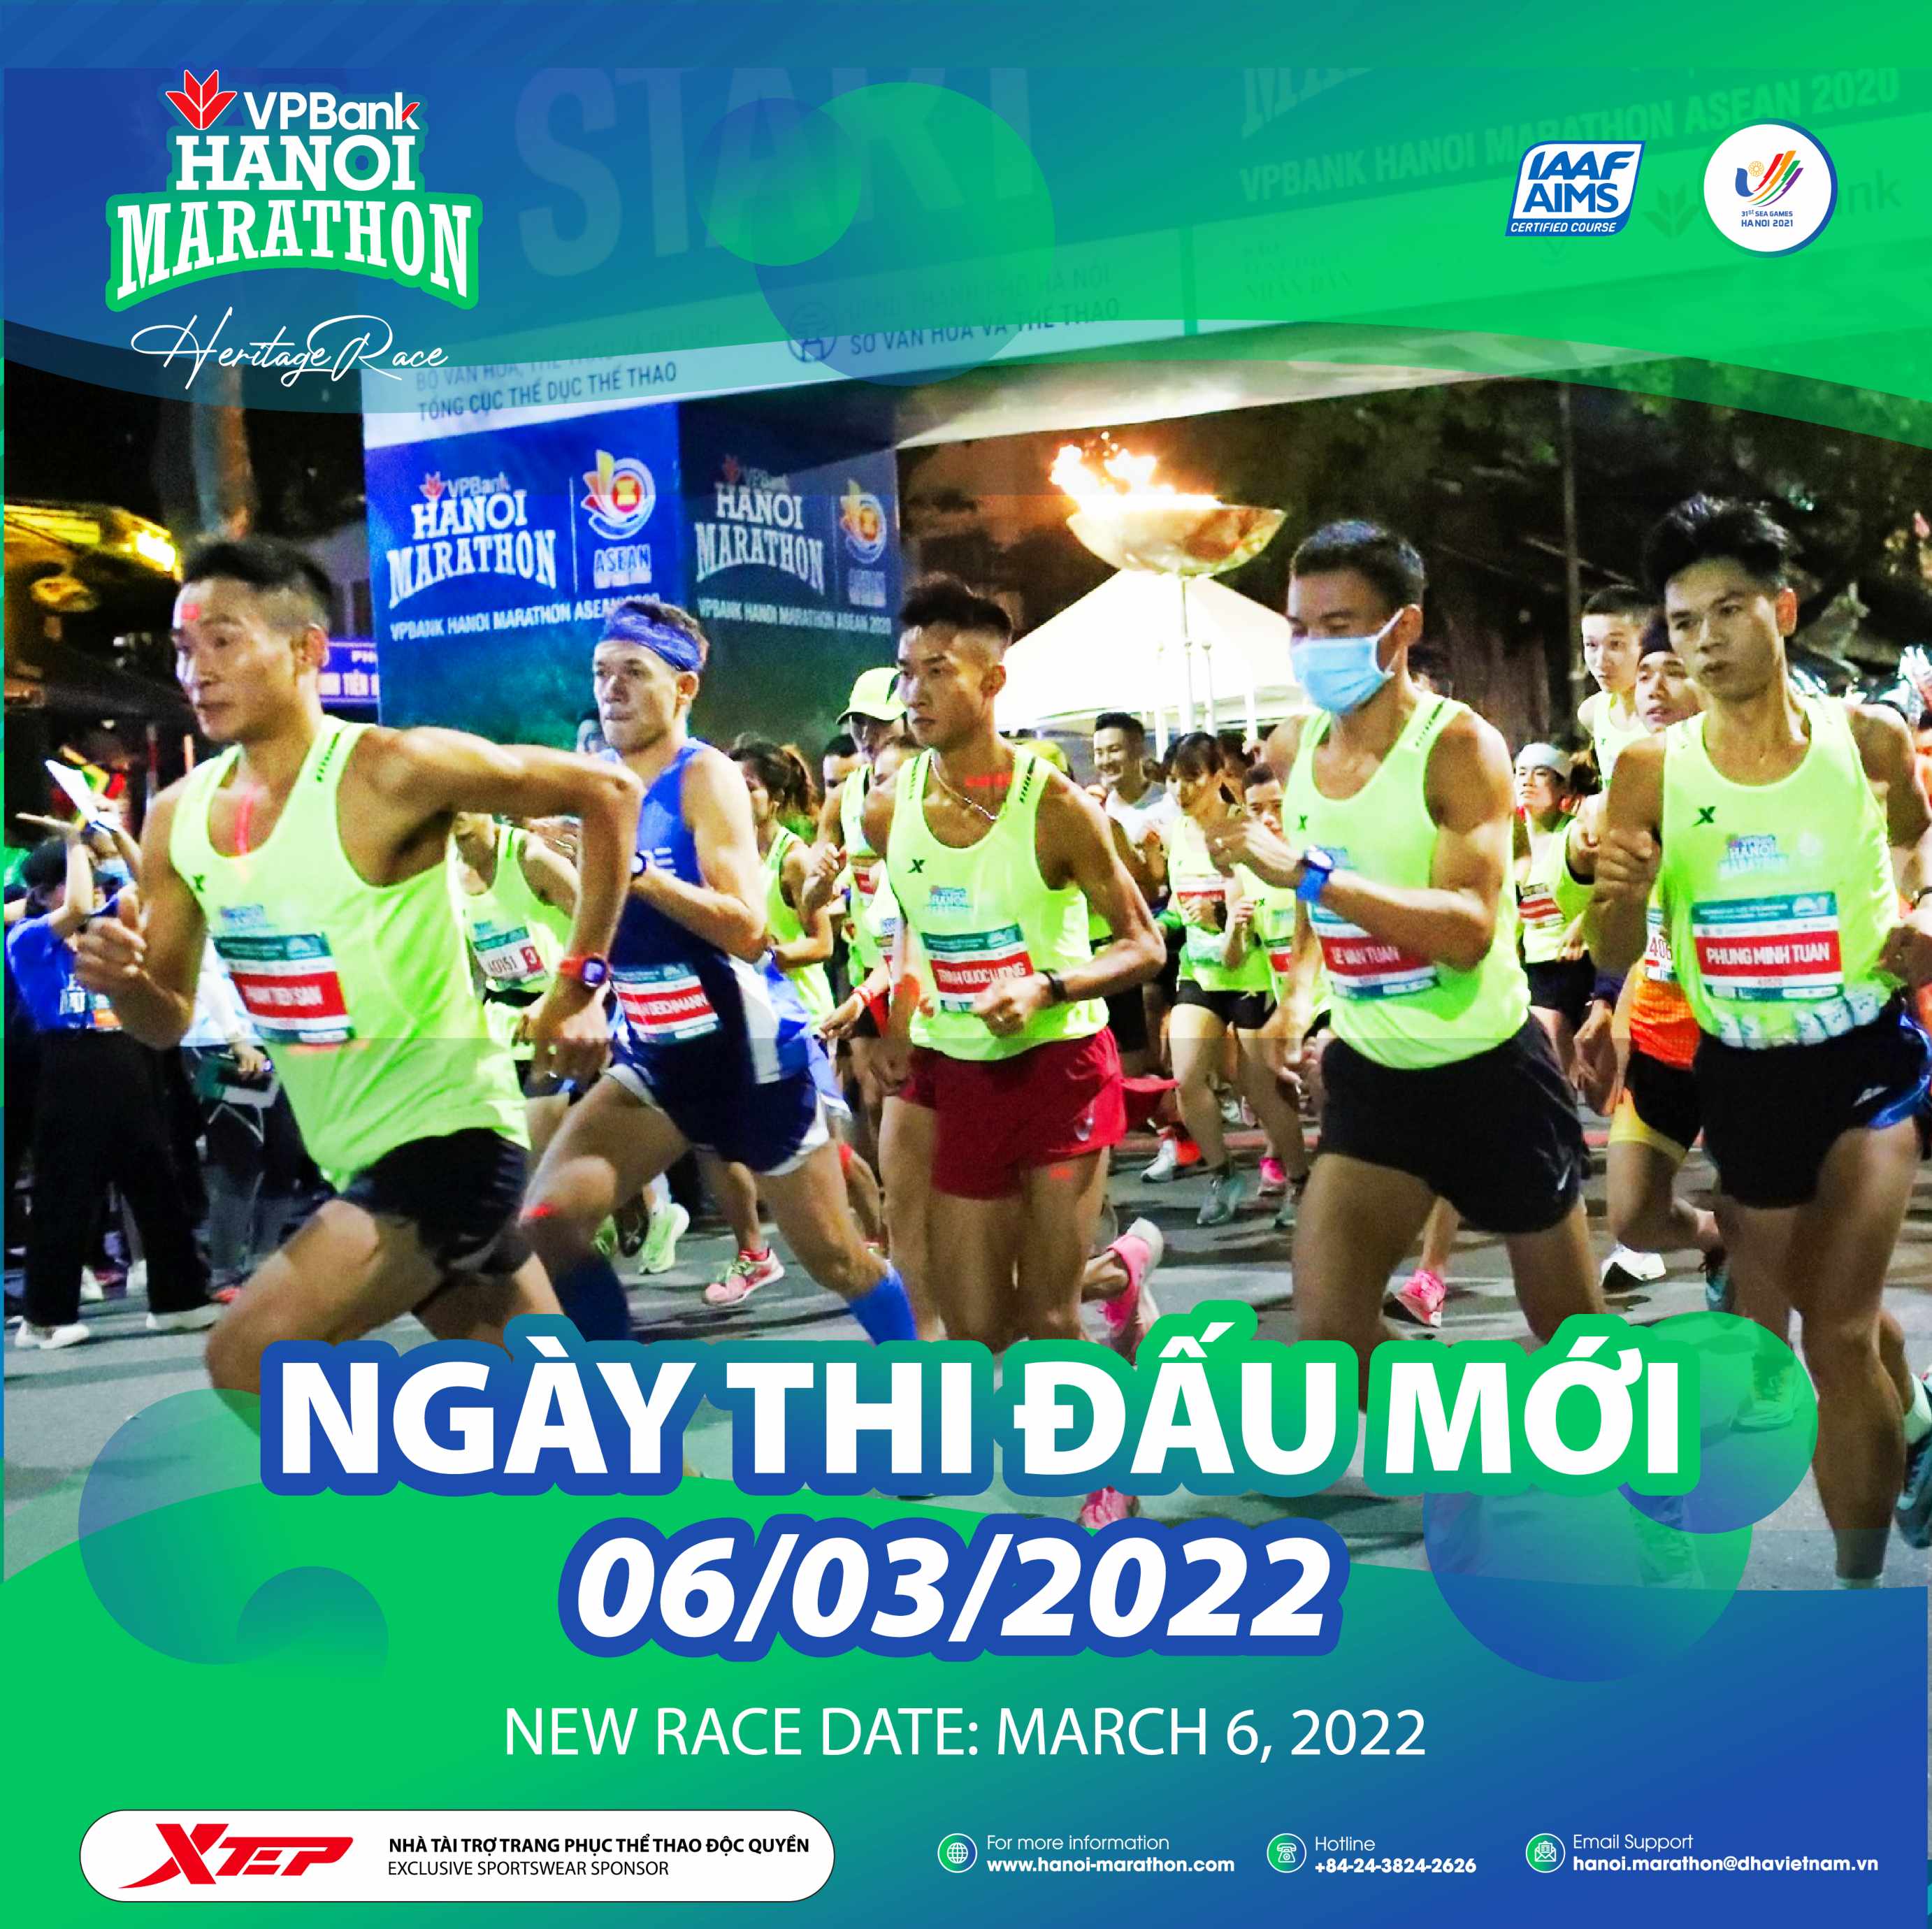 ANNOUNCEMENT: VPBank Hanoi Mararathon 2021 Race Date Moved To March 6, 2022